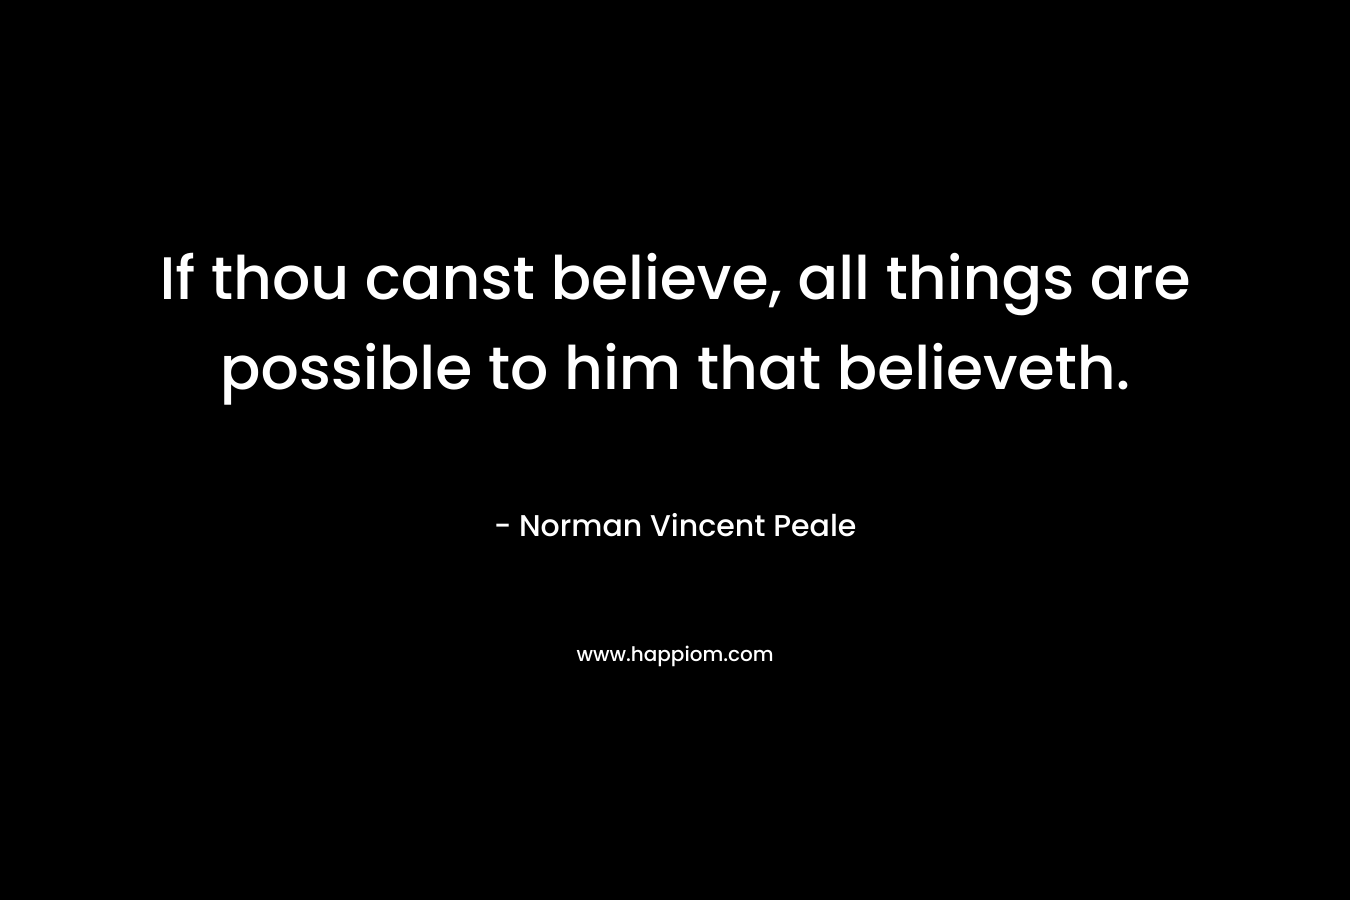 If thou canst believe, all things are possible to him that believeth. – Norman Vincent Peale